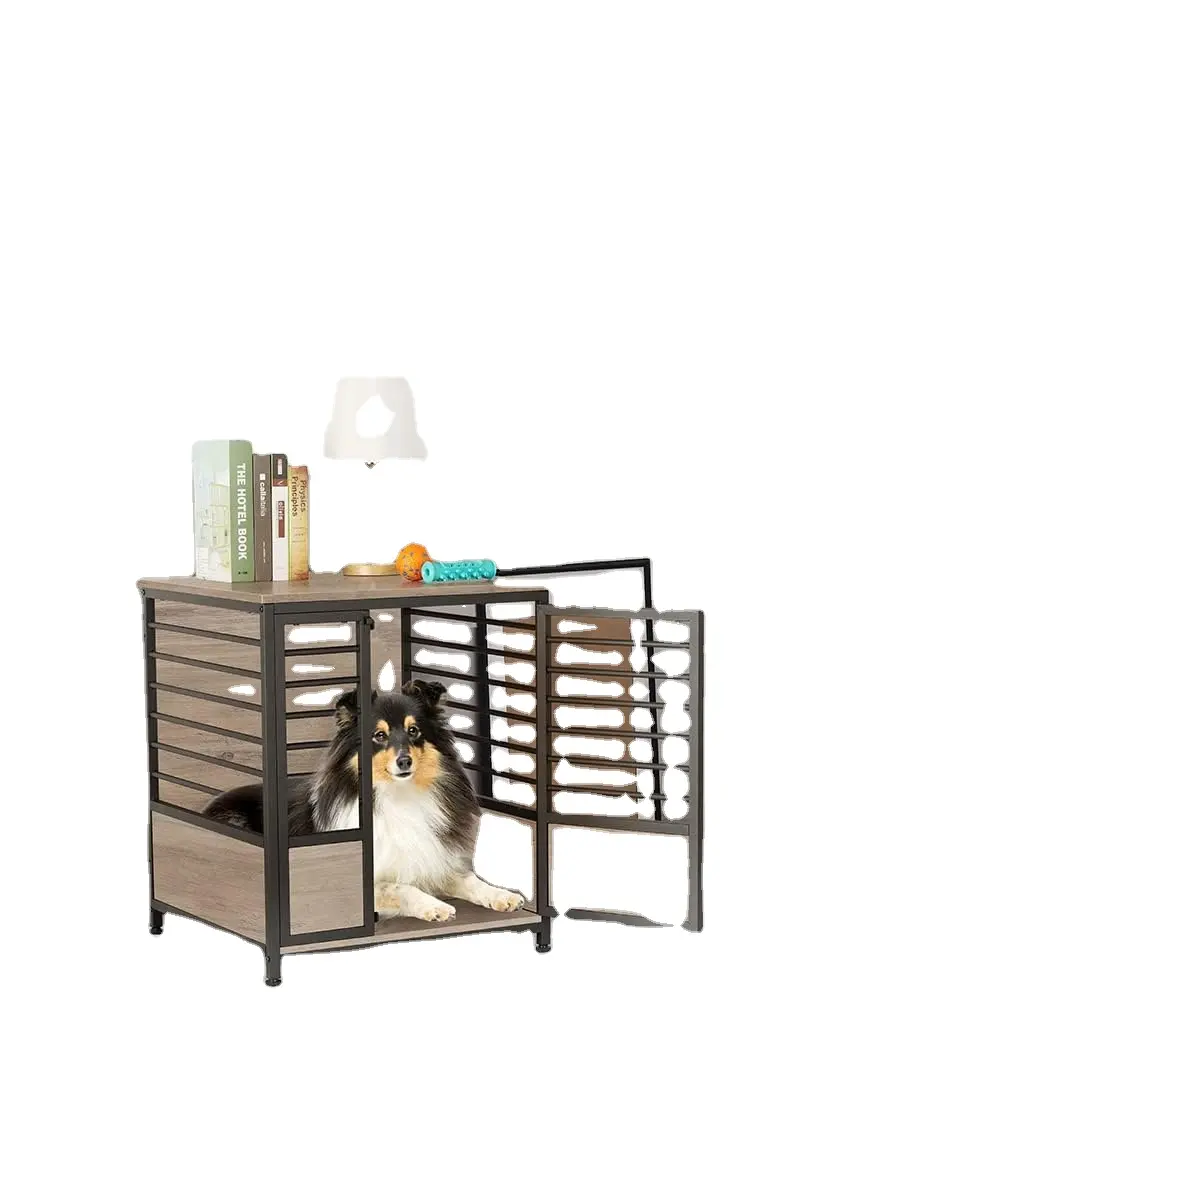 Wooden heavy dog cage side table, indoor dog kennel, decorative style steel pipe structure pet box house